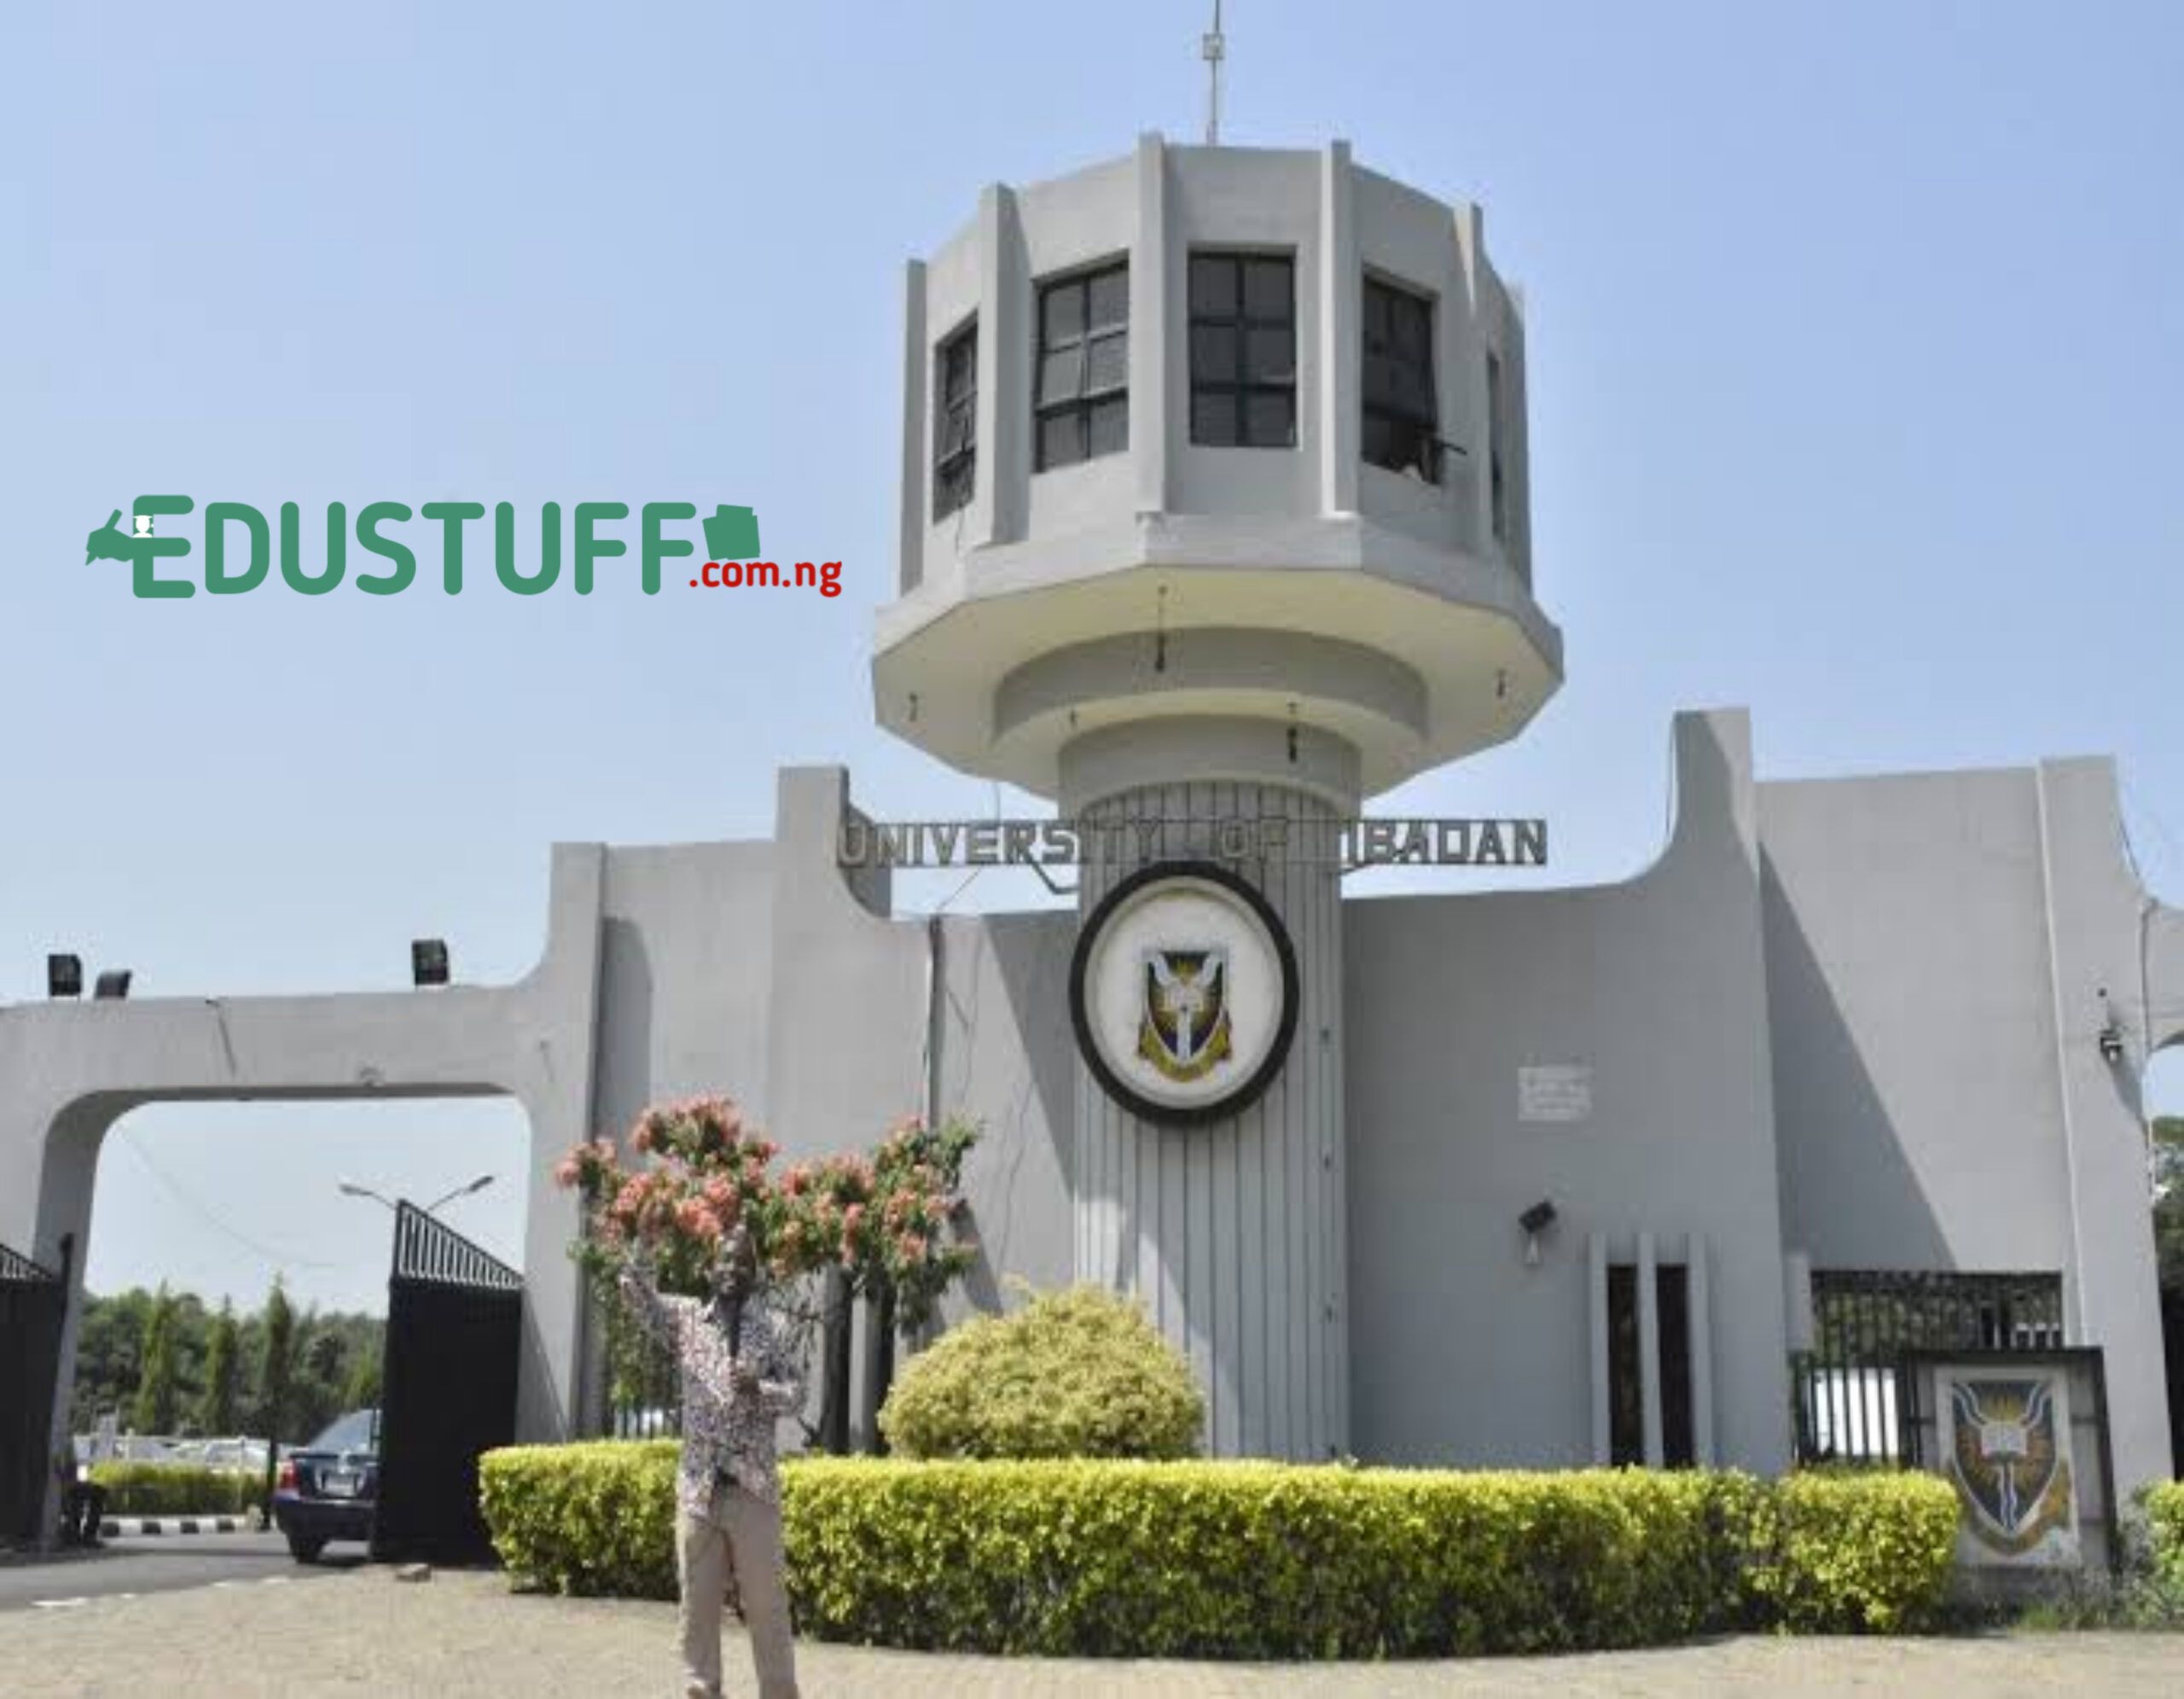 UI Set To Hold Virtual Matriculation Ceremony, Issues Notice